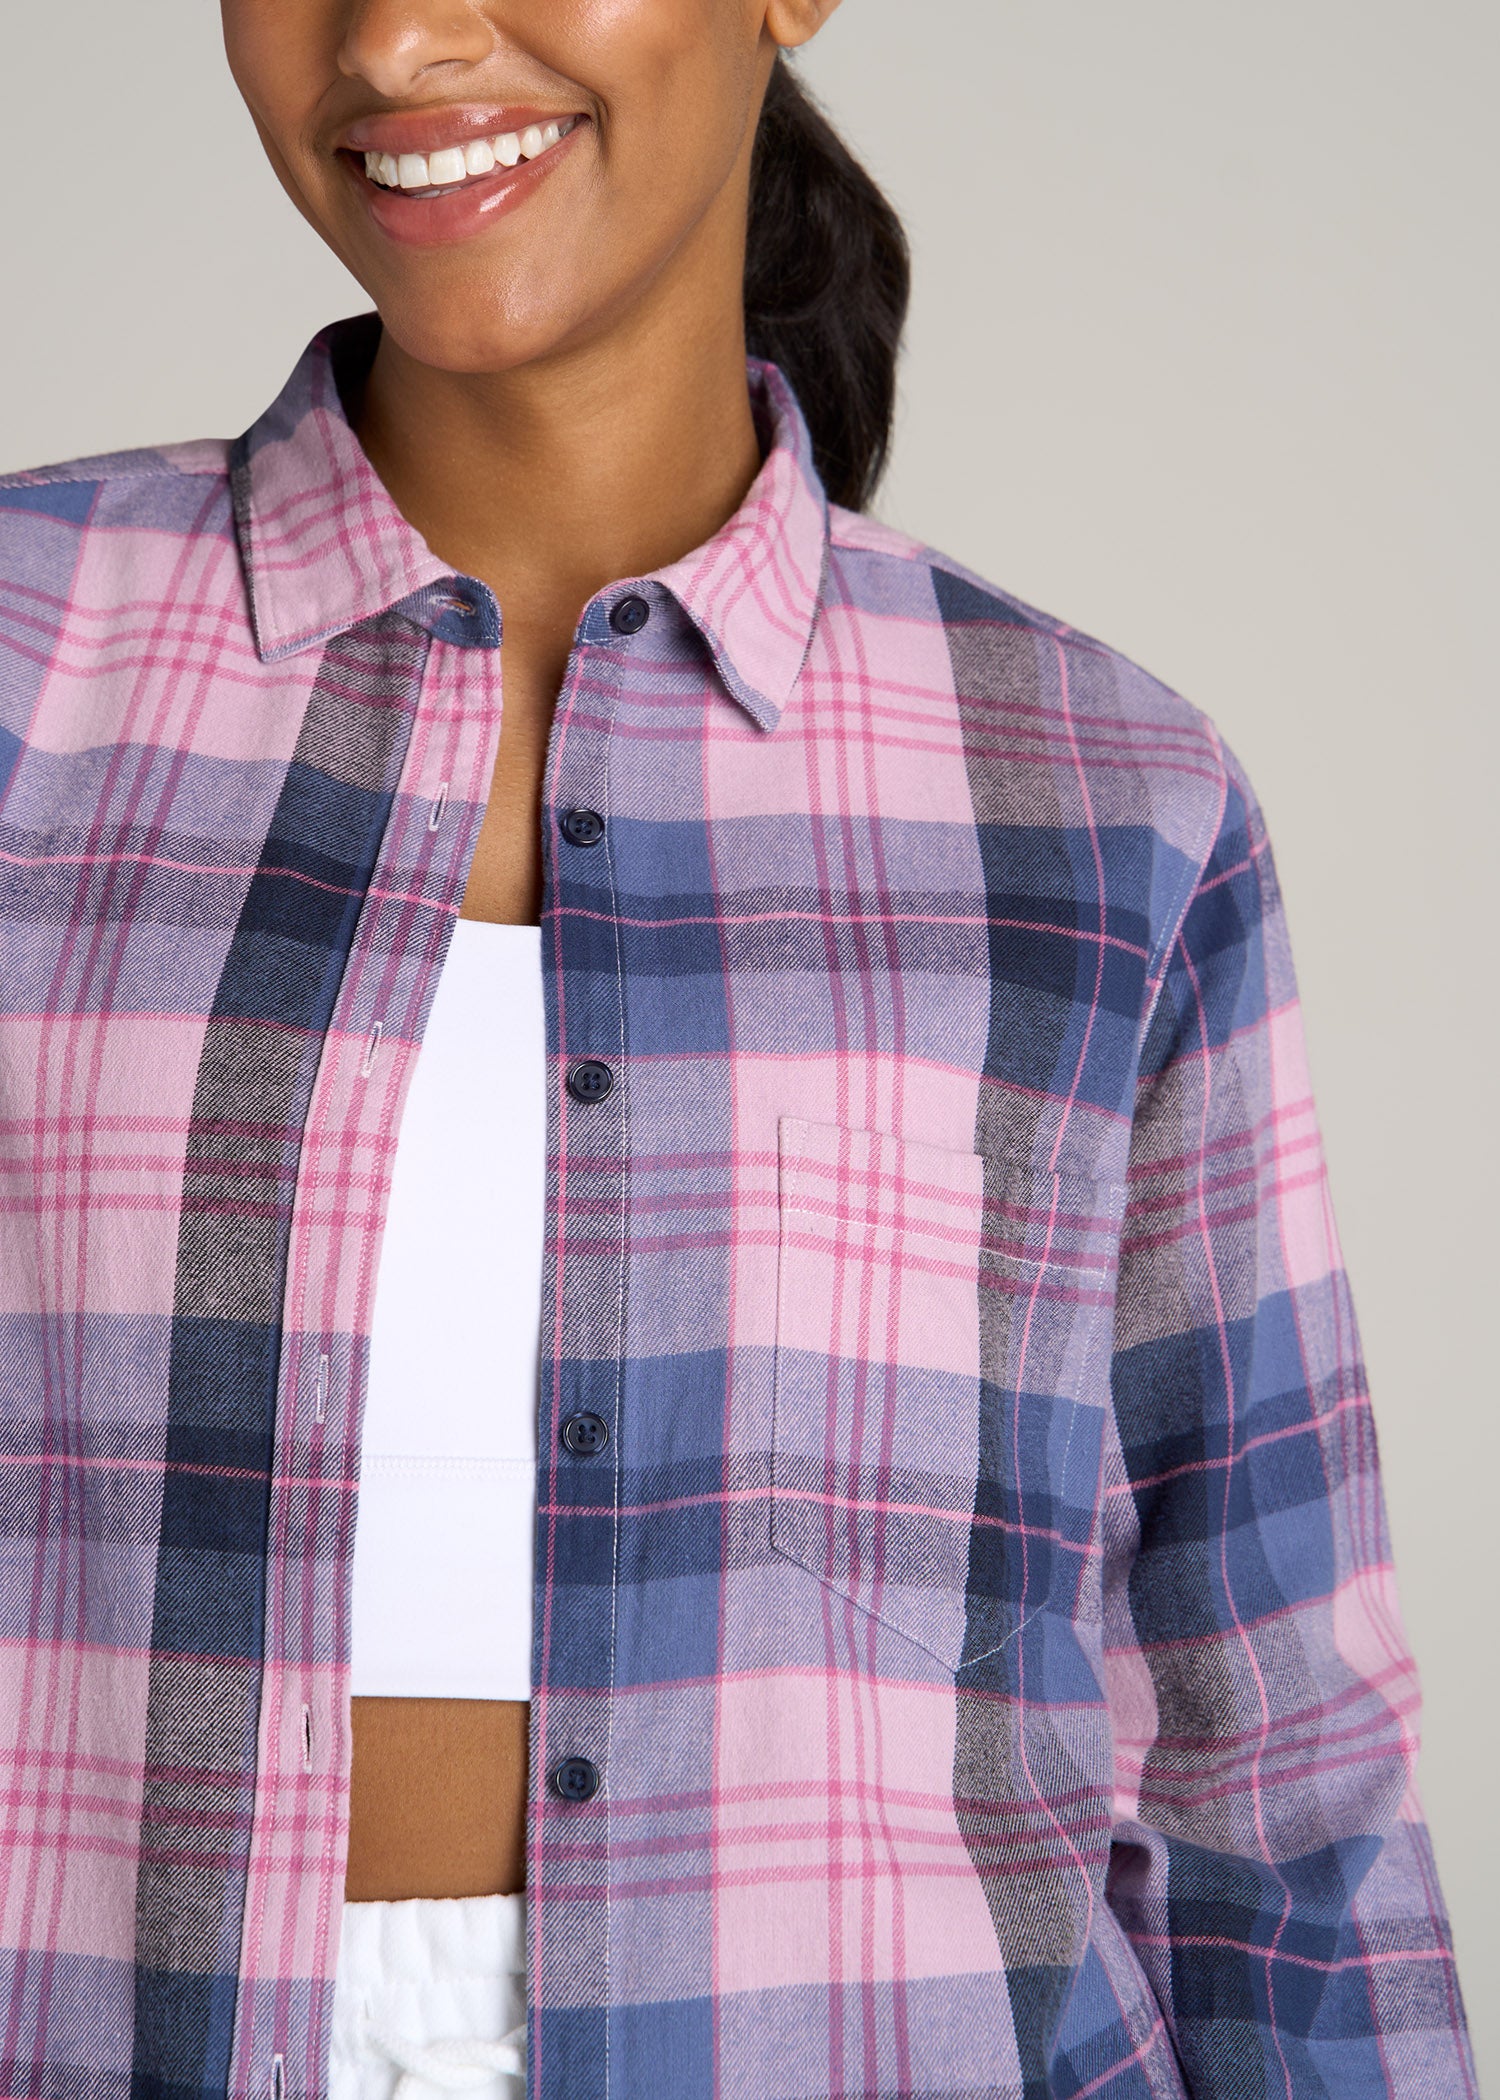 Tall woman wearing American Tall's Flannel Button-Up Shirt for Tall Women in Mauve and Blue Plaid.